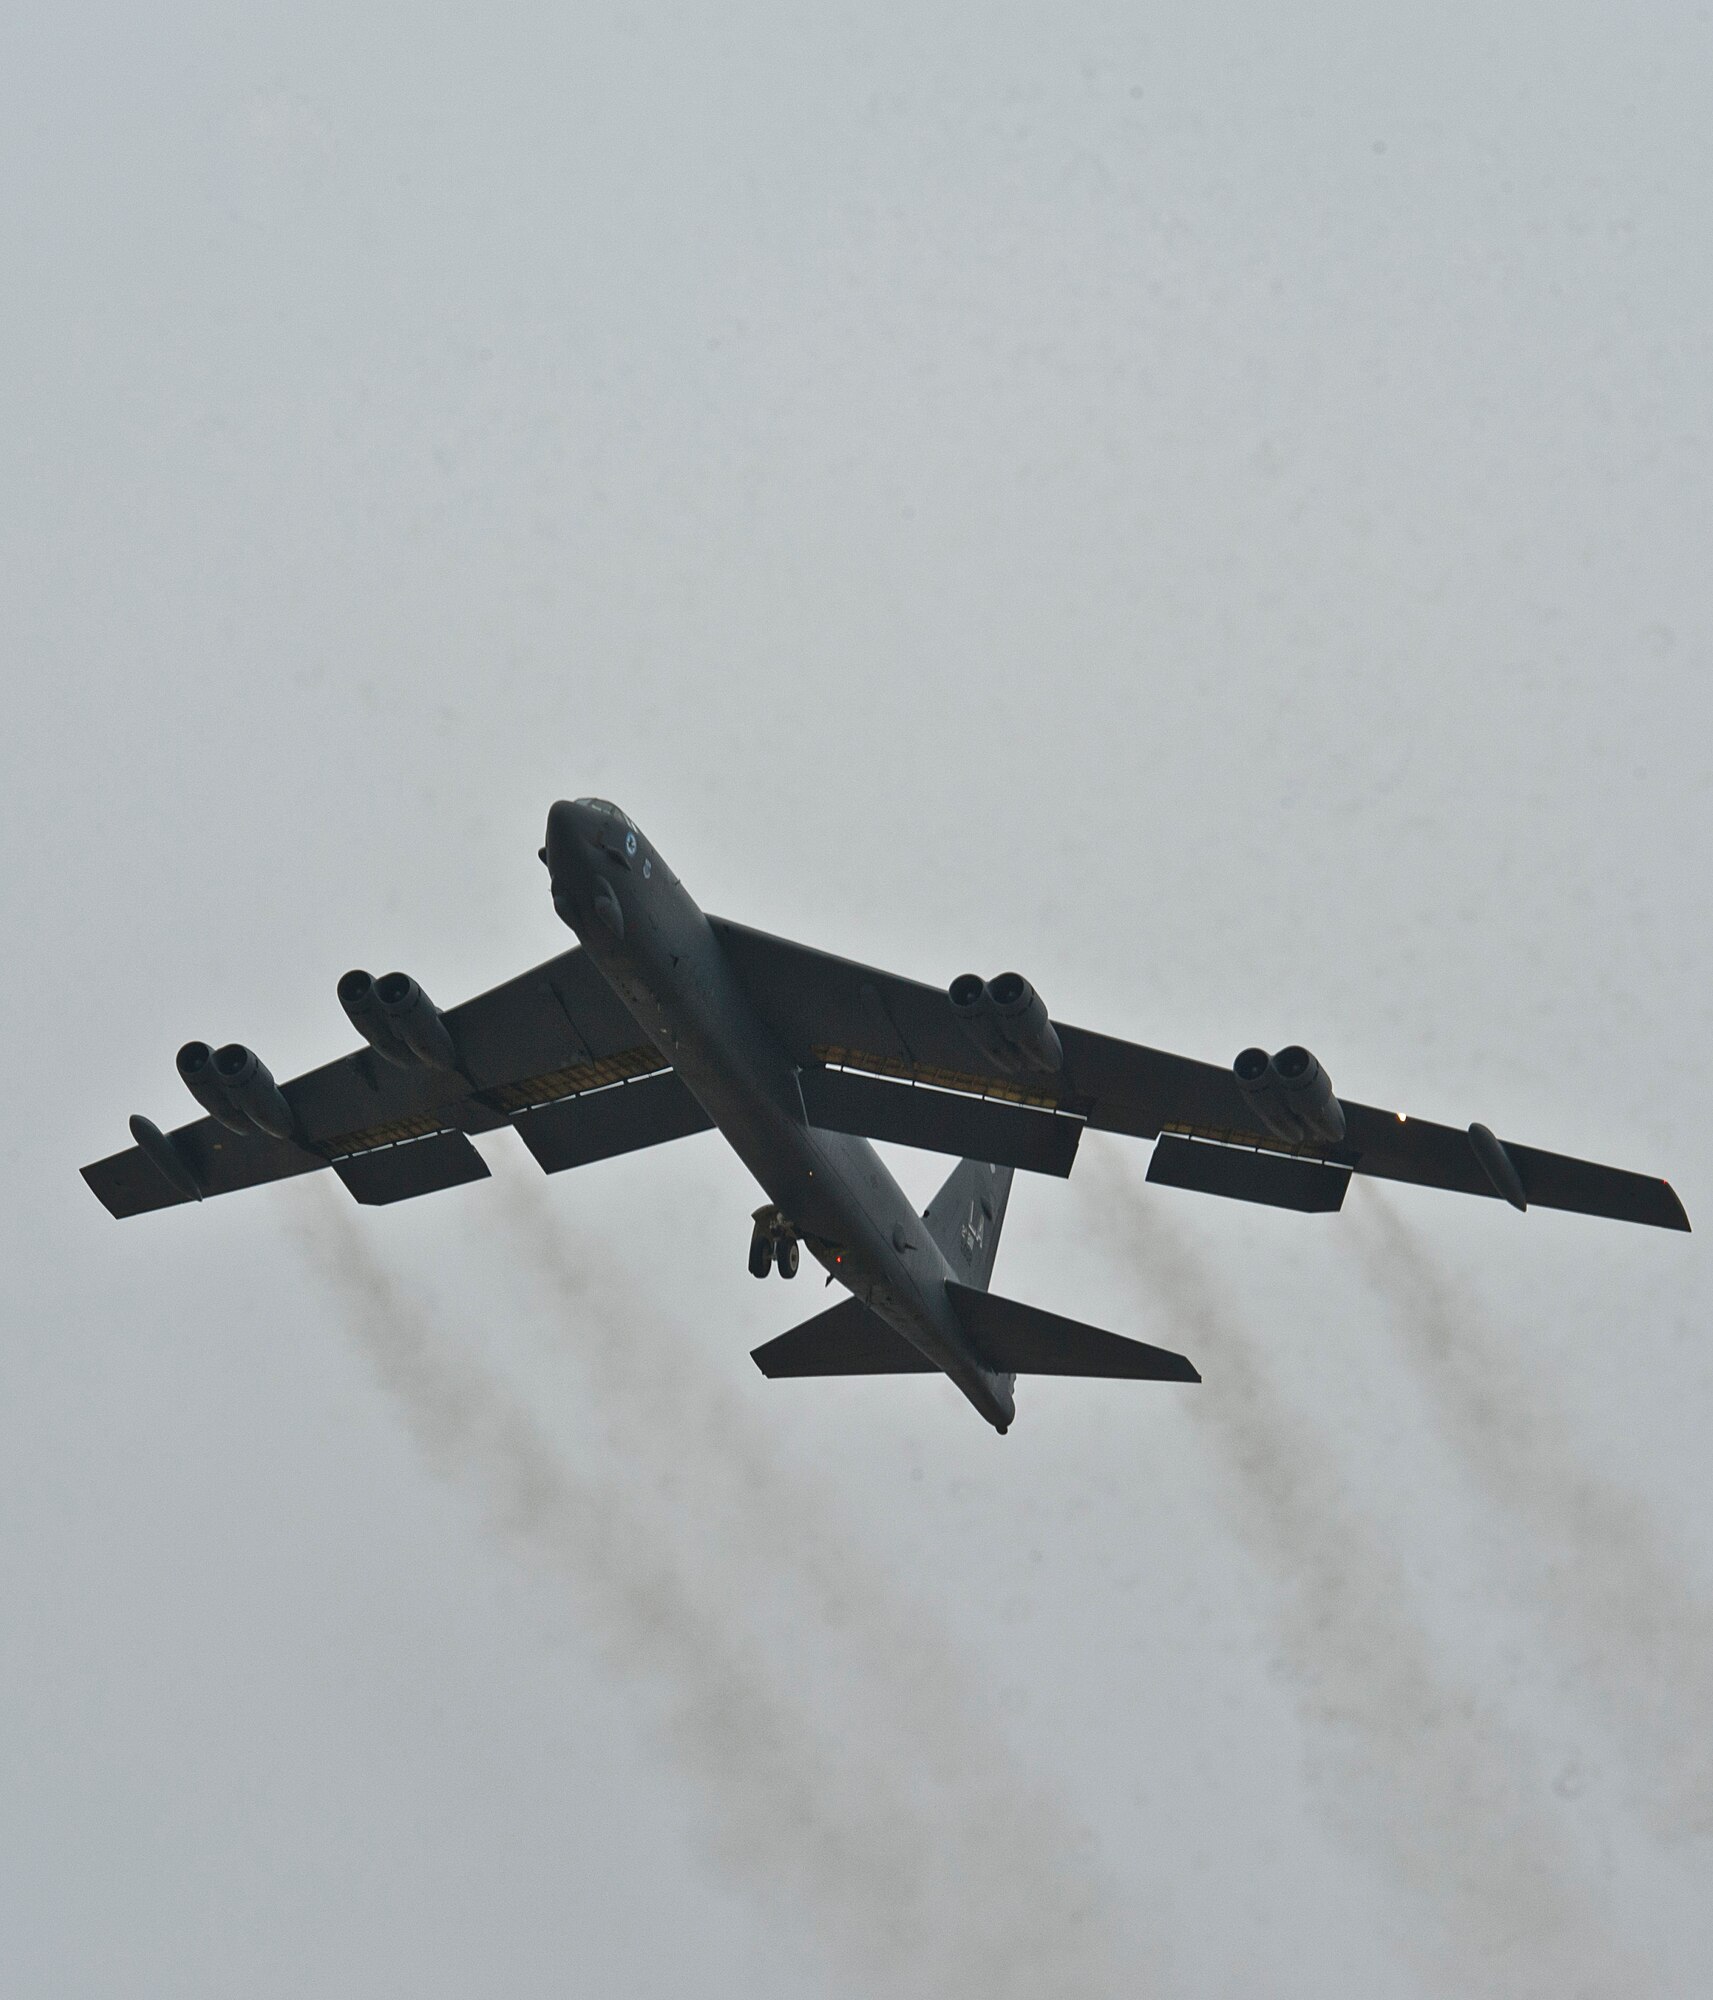 A B-52H Stratofortress assigned to Air Force Global Strike Command (AFGSC) flies over Minot Air Force Base, N.D., Oct. 30, 2016, during exercise Global Thunder 17. AFGSC supports U.S. Strategic Command's (USSTRATCOM) global strike and nuclear deterrence missions by providing strategic assets, including bombers like the B-52 and B-2, to ensure a safe, secure, effective and ready deterrent force. Global Thunder is an annual training event that assesses command and control functionality in all USSTRATCOM mission areas and affords component commands a venue to evaluate their joint operational readiness. (U.S. Air Force photo by Airman 1st Class Jonathan McElderry)